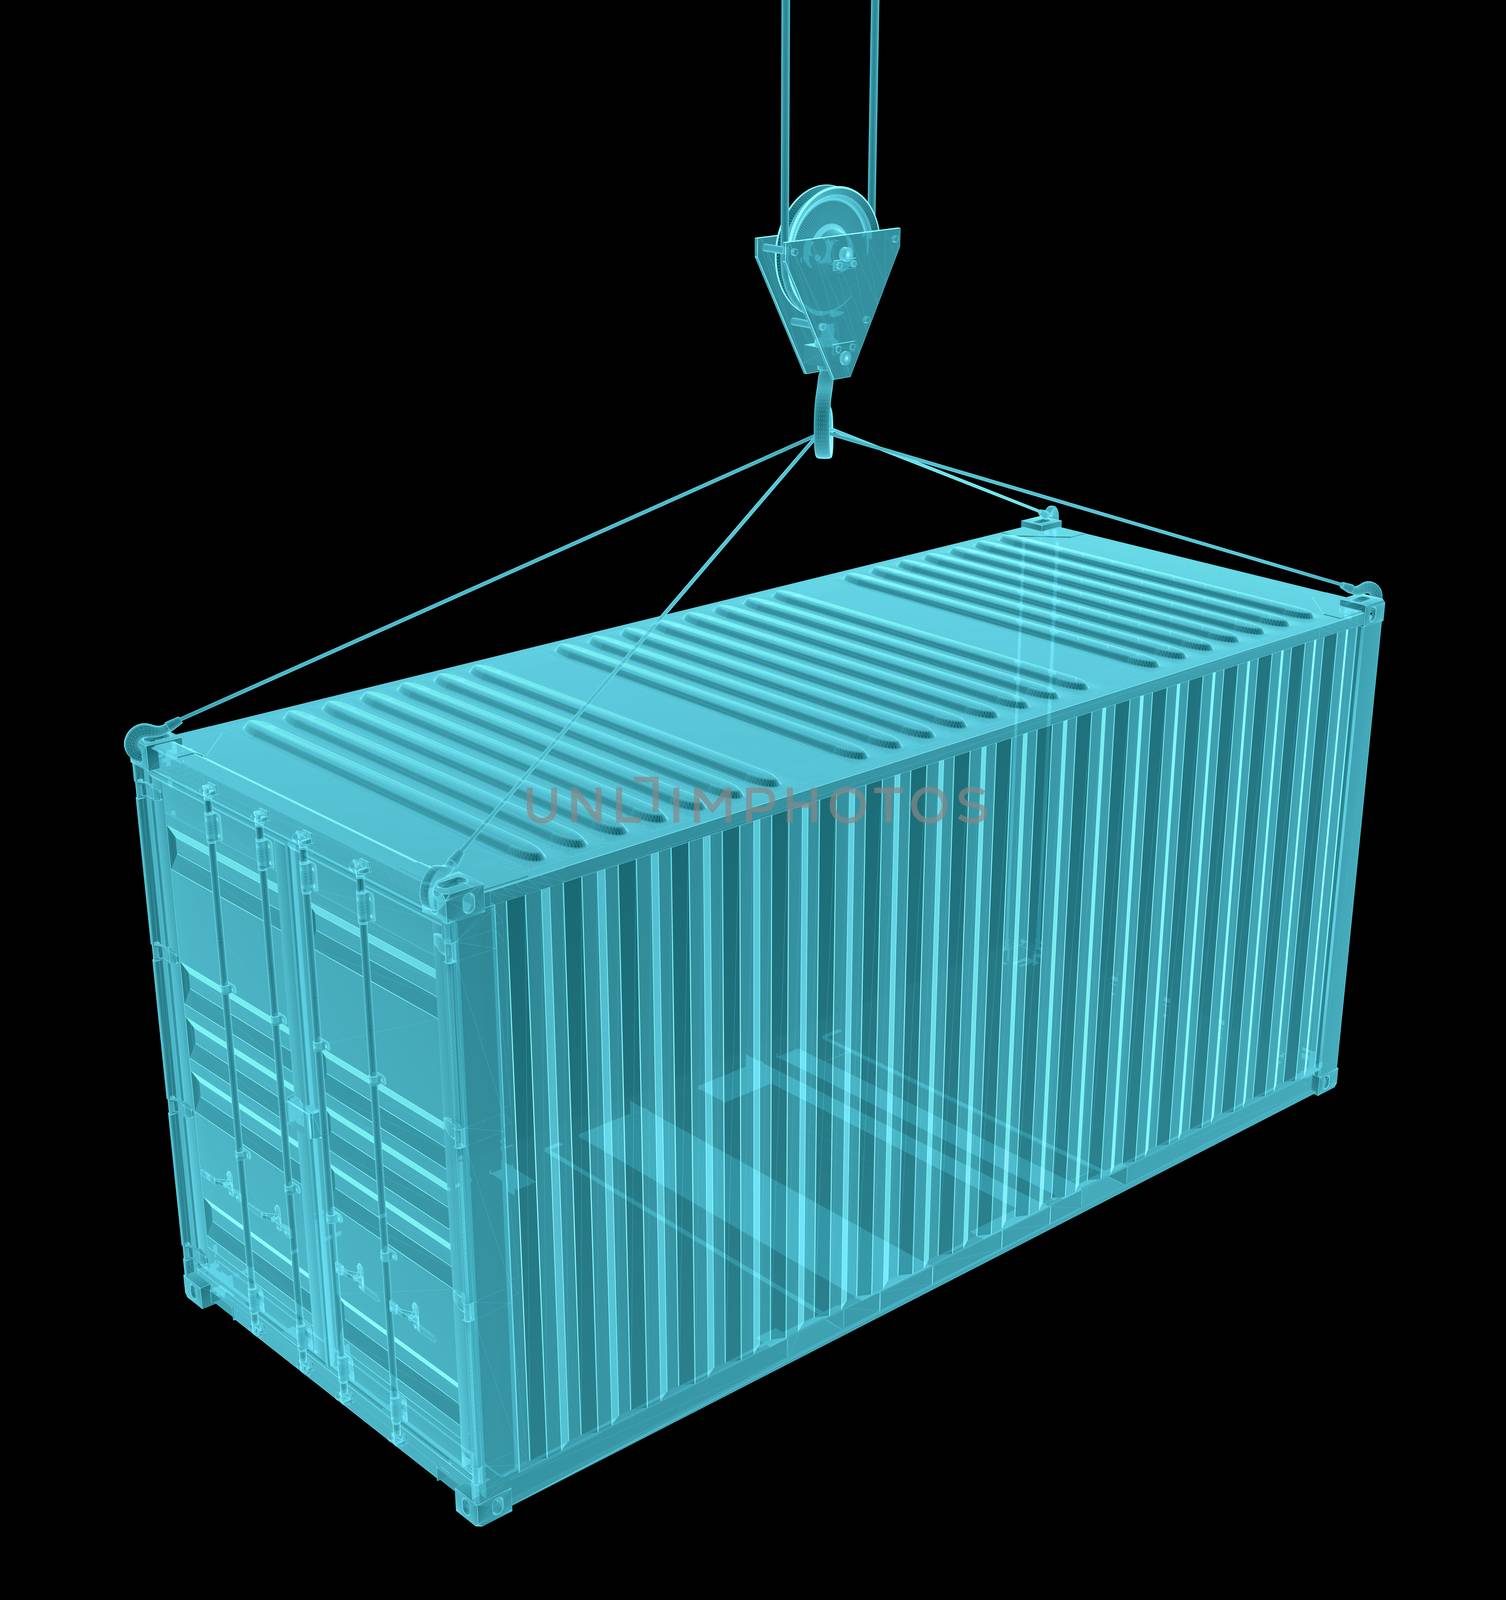 Shipping container with hook. X-ray image by cherezoff